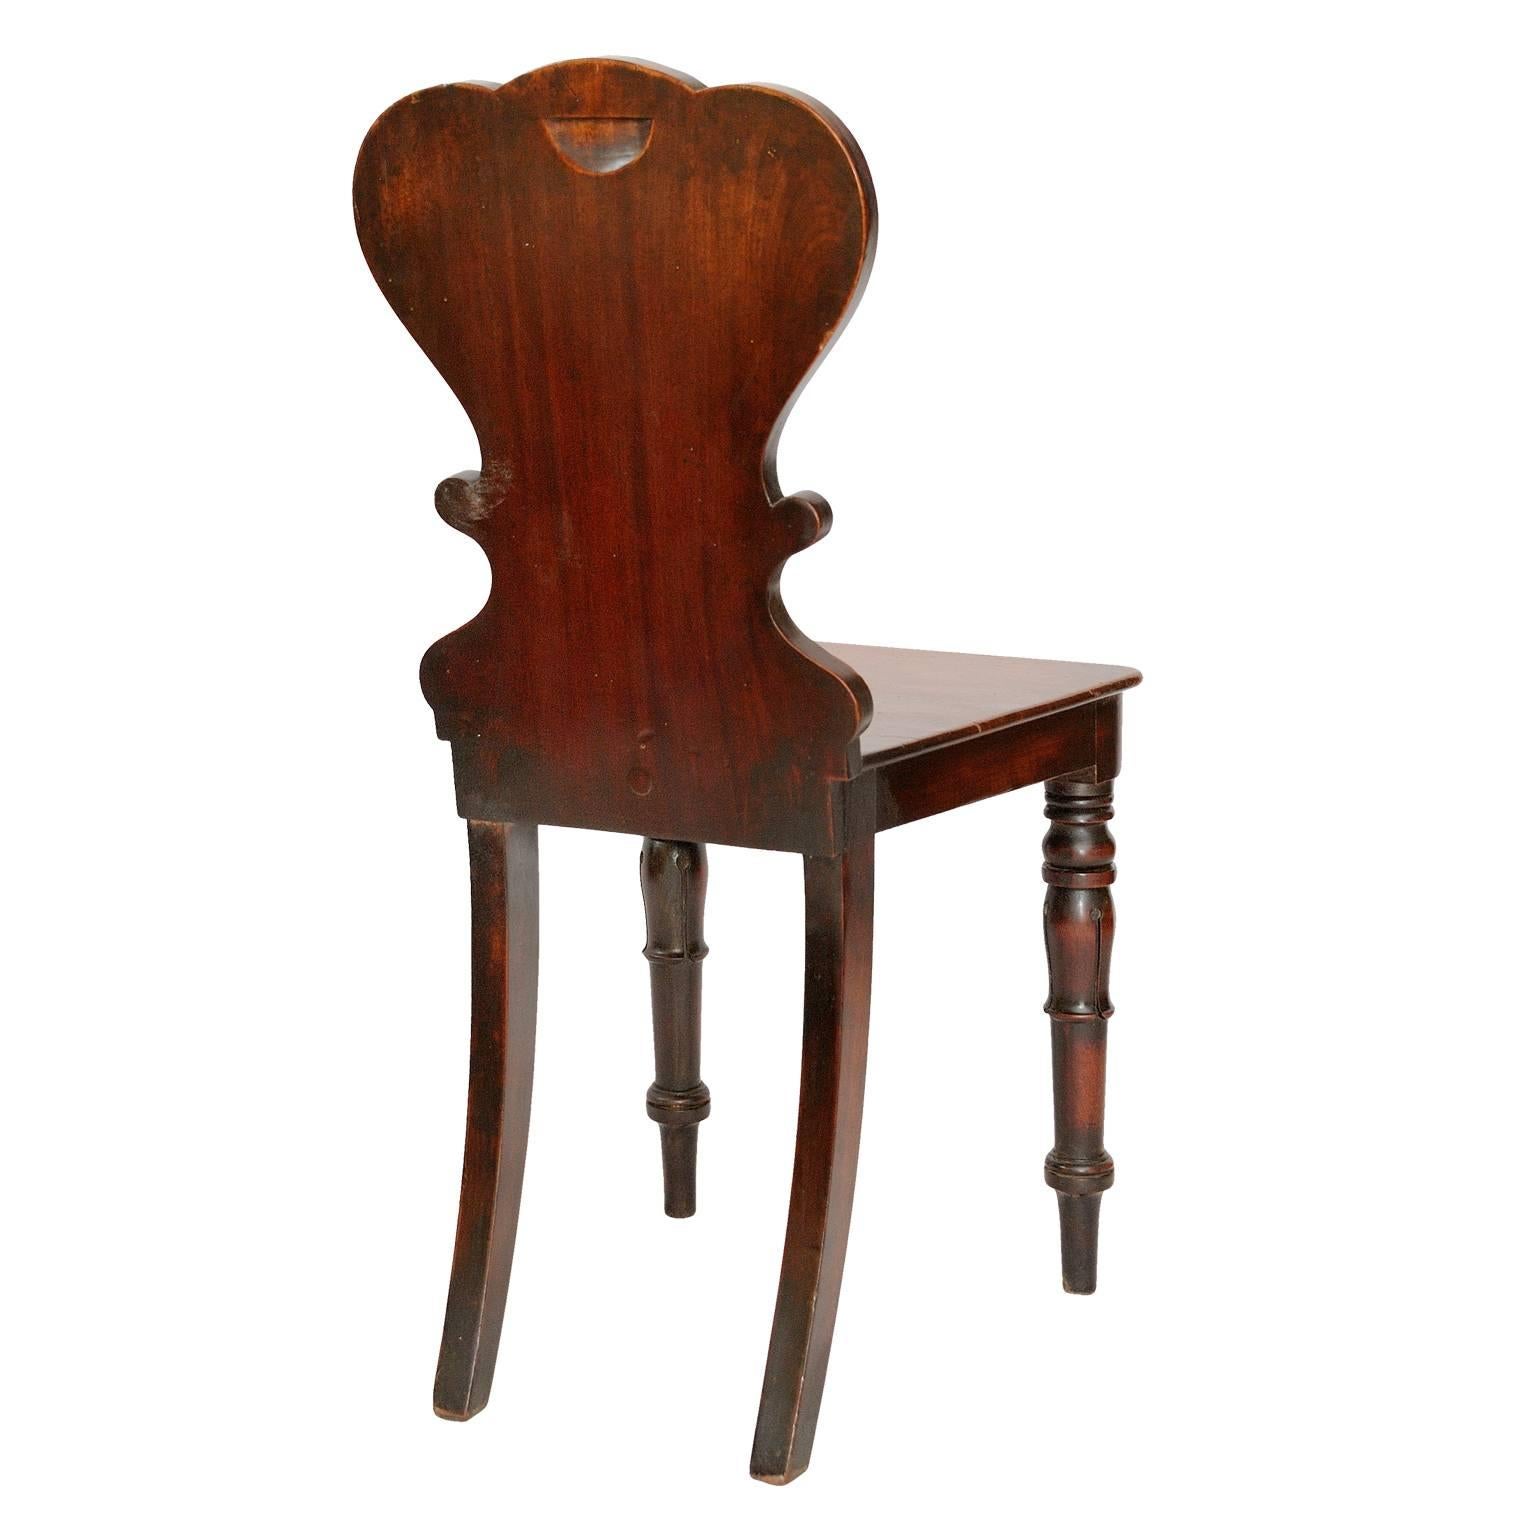 Polished Pair of Late Regency English Mahogany Hall Chairs, circa 1830 For Sale